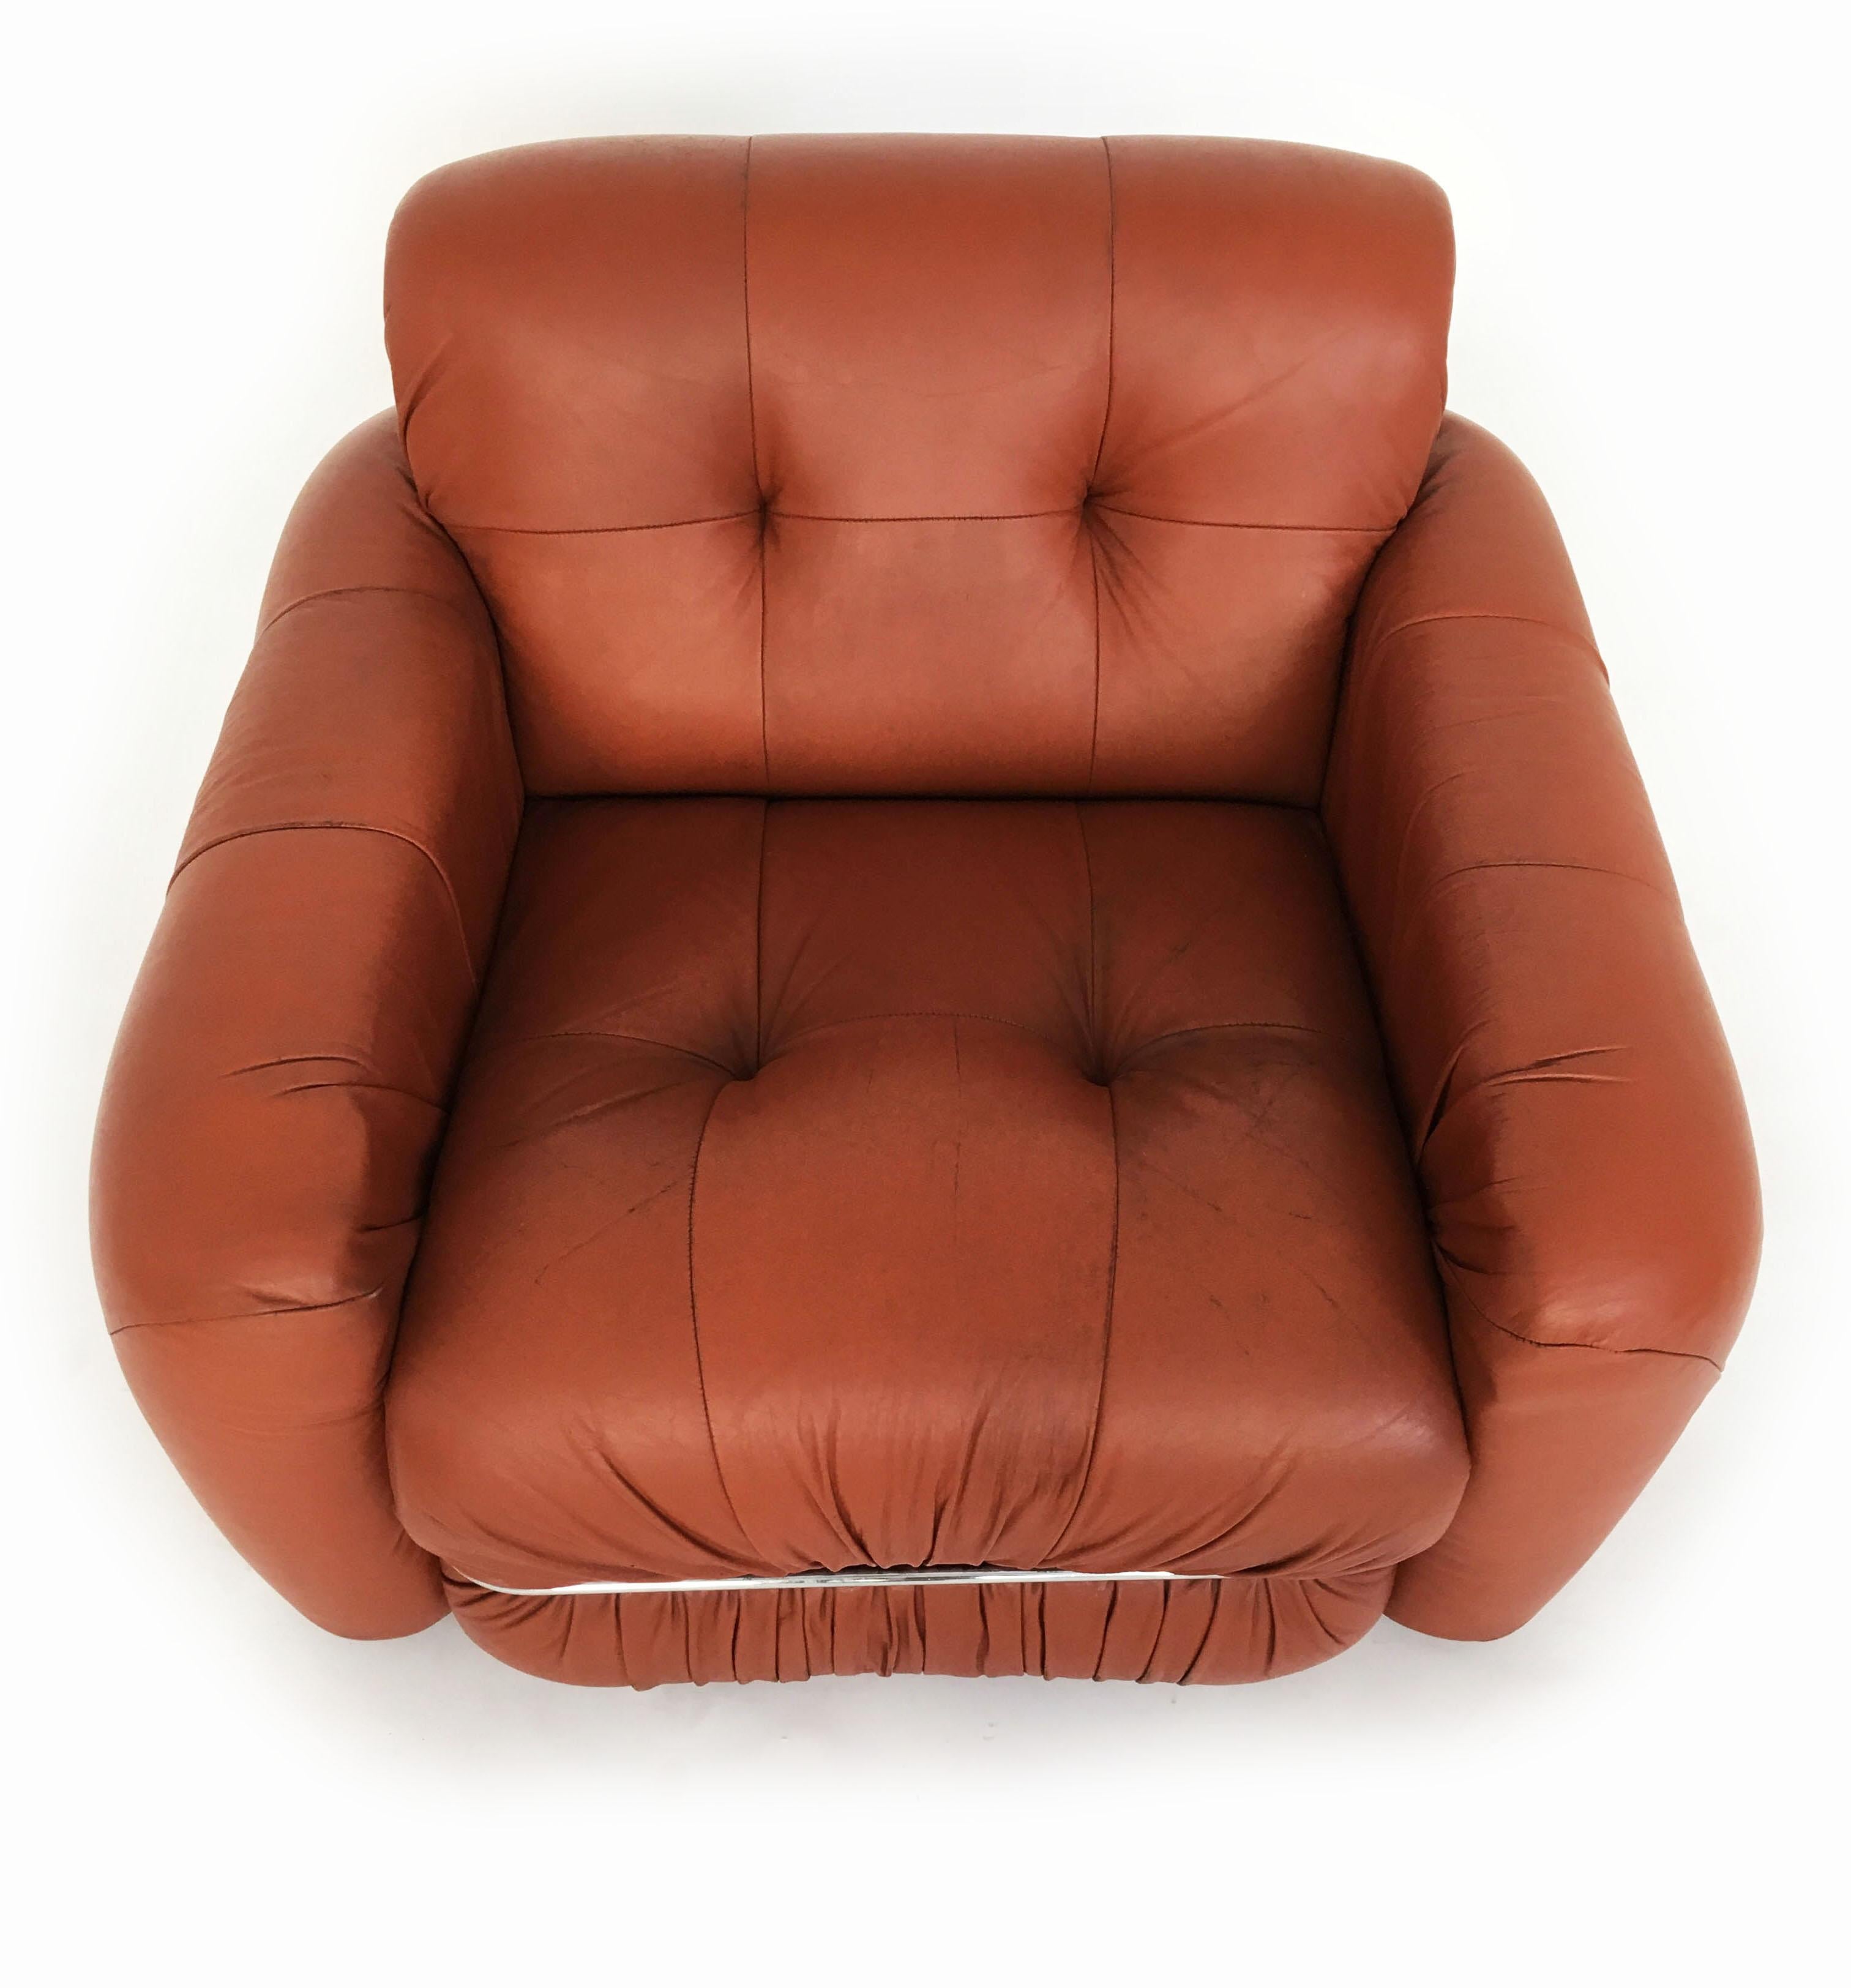 Jean Gillon Cognac Patchwork Leather Club Chairs by Probel, Brazil 1970s For Sale 3